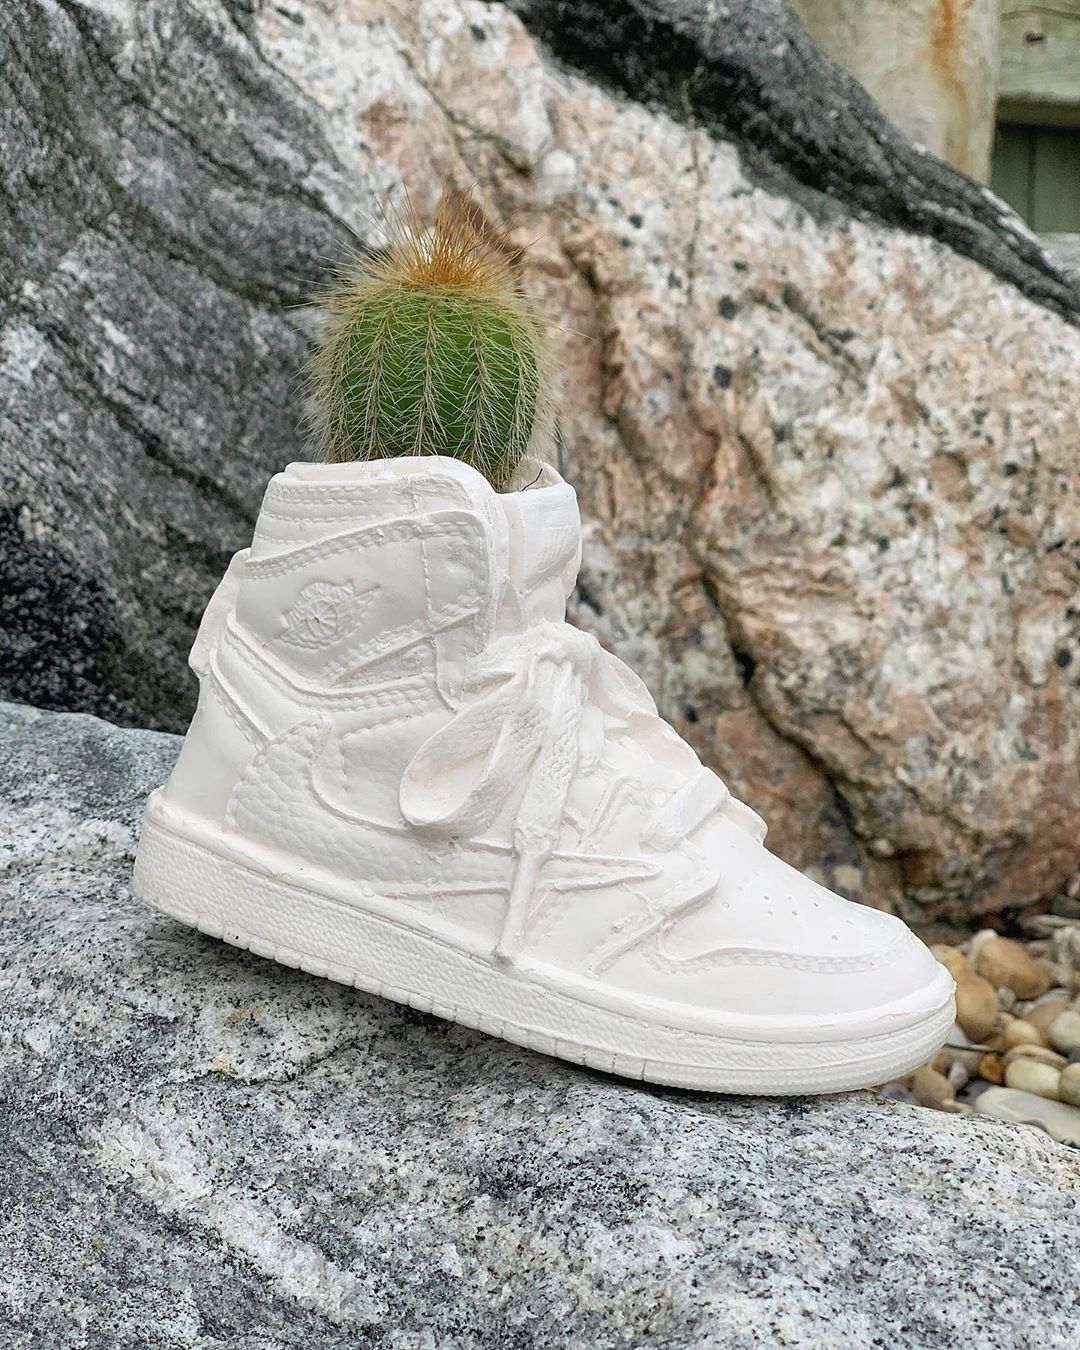 Bodega Rose is Raffling a Jordan 1 Planter for the COVID Bail Out Fund